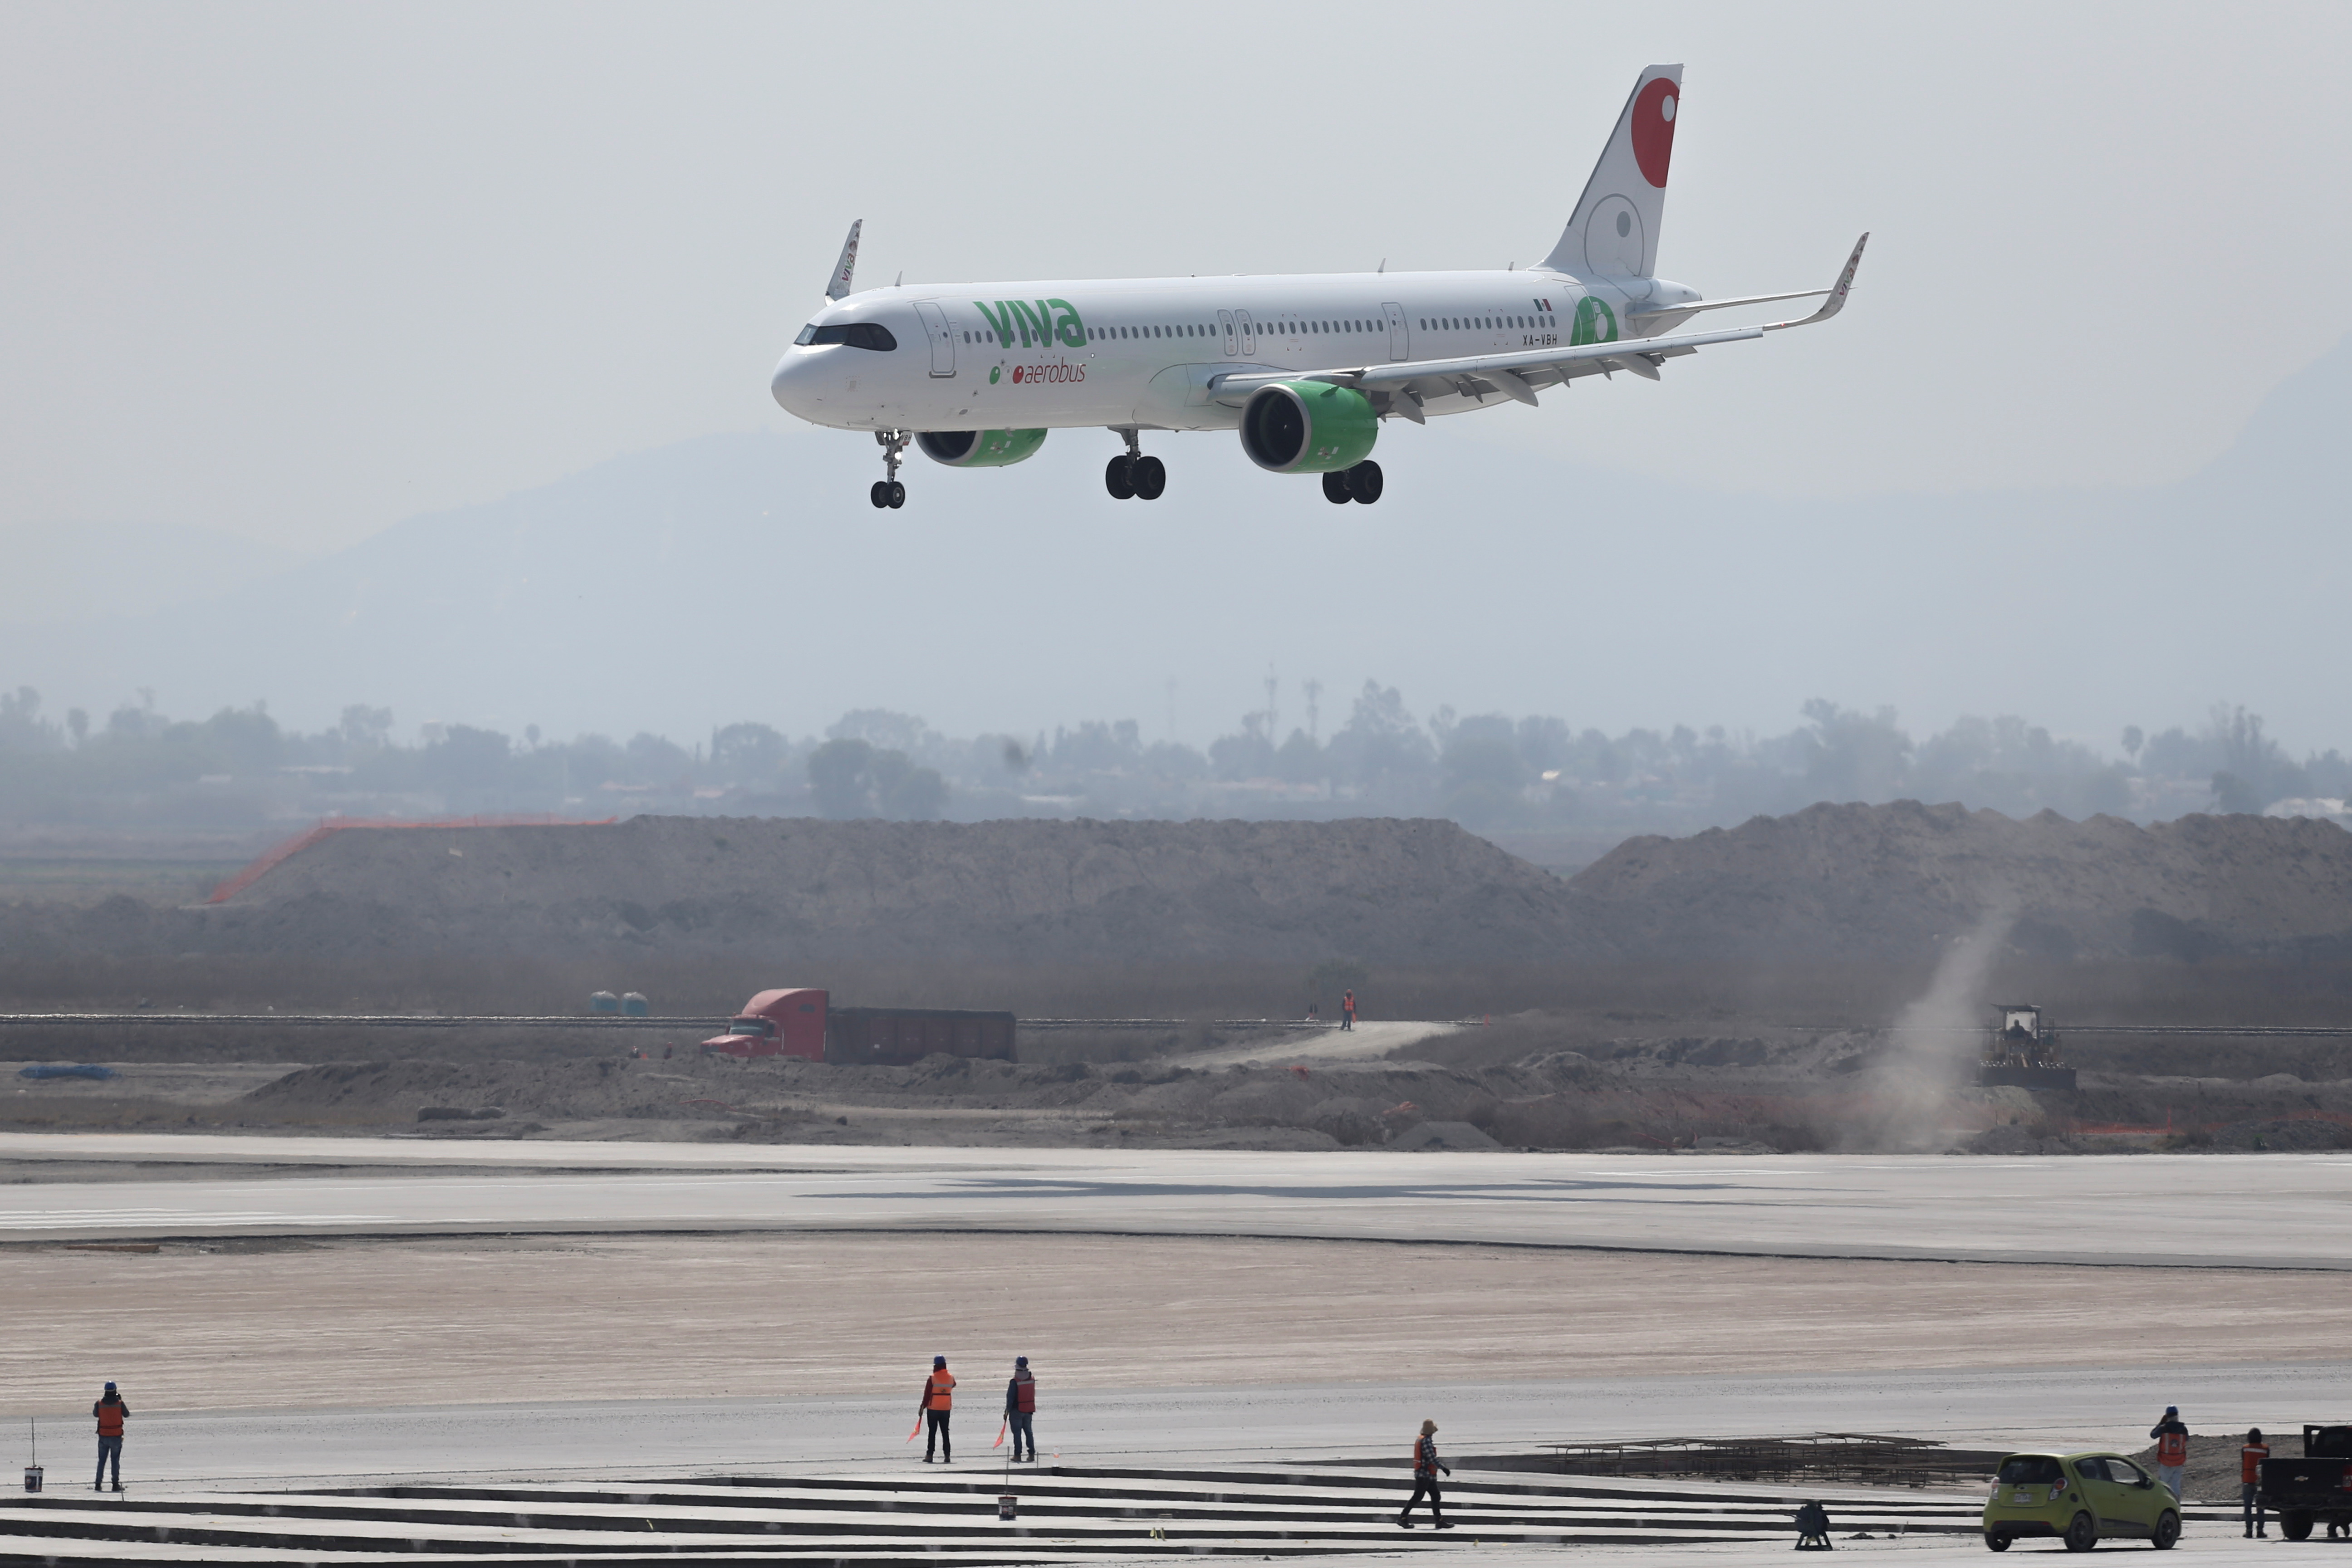 Inauguration of the first stage of the new international airport in Mexico